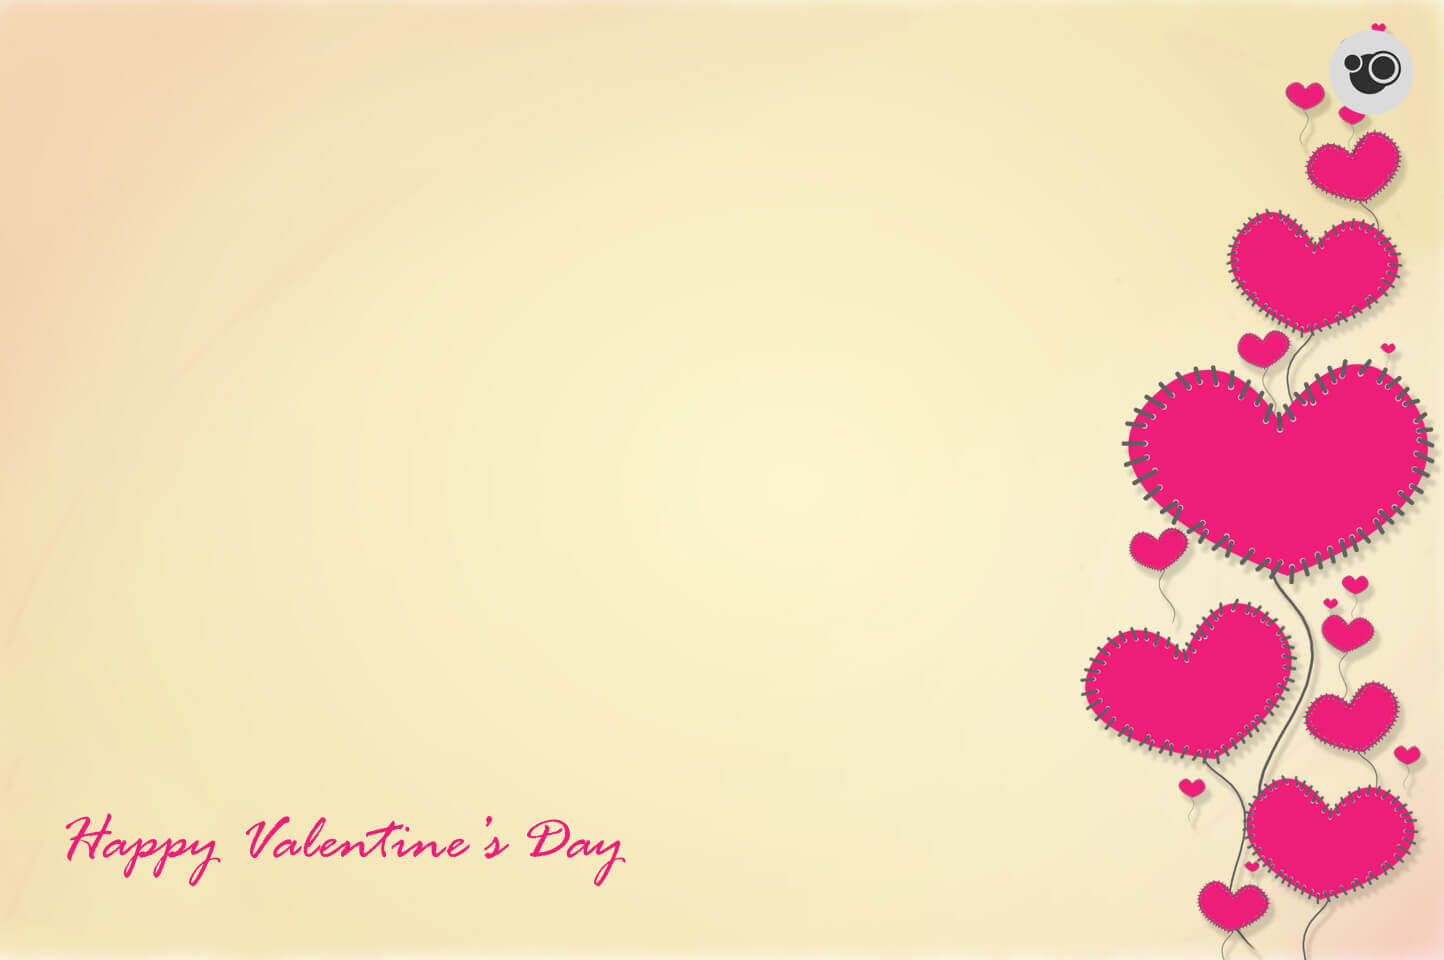 Light-color-valentine-day-hd-wallpaper-download-free-cgfrog